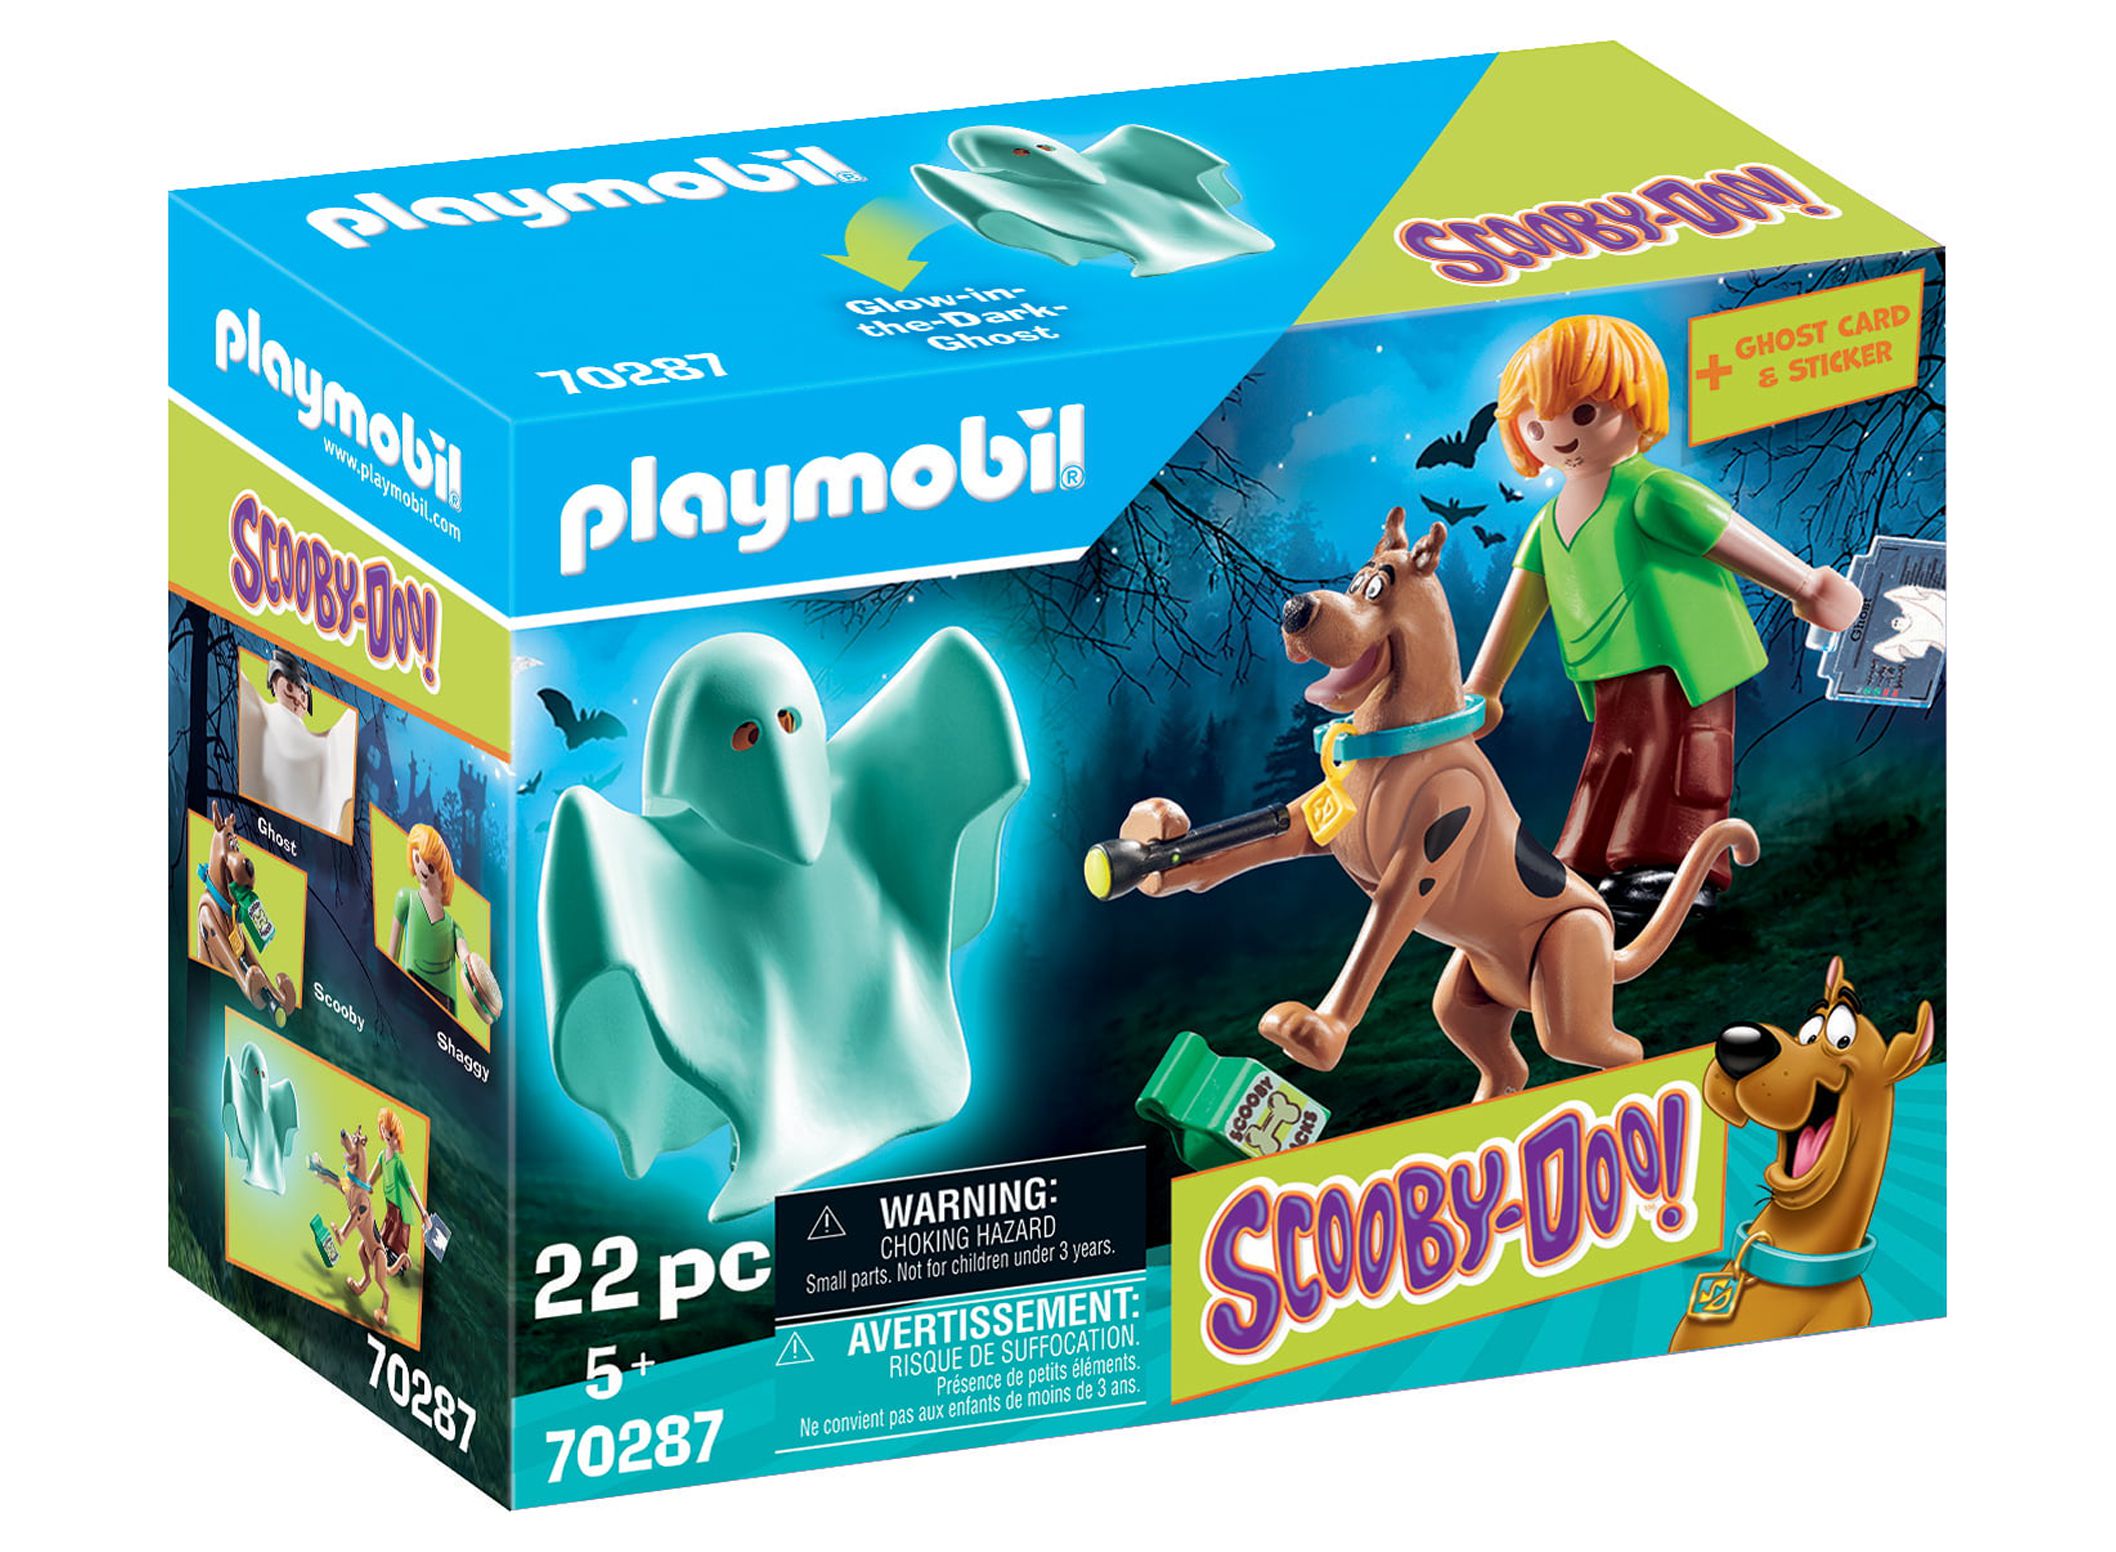 PLAYMOBIL Scooby Doo Scooby & Shaggy with Ghost Action Figure Set - image 4 of 5